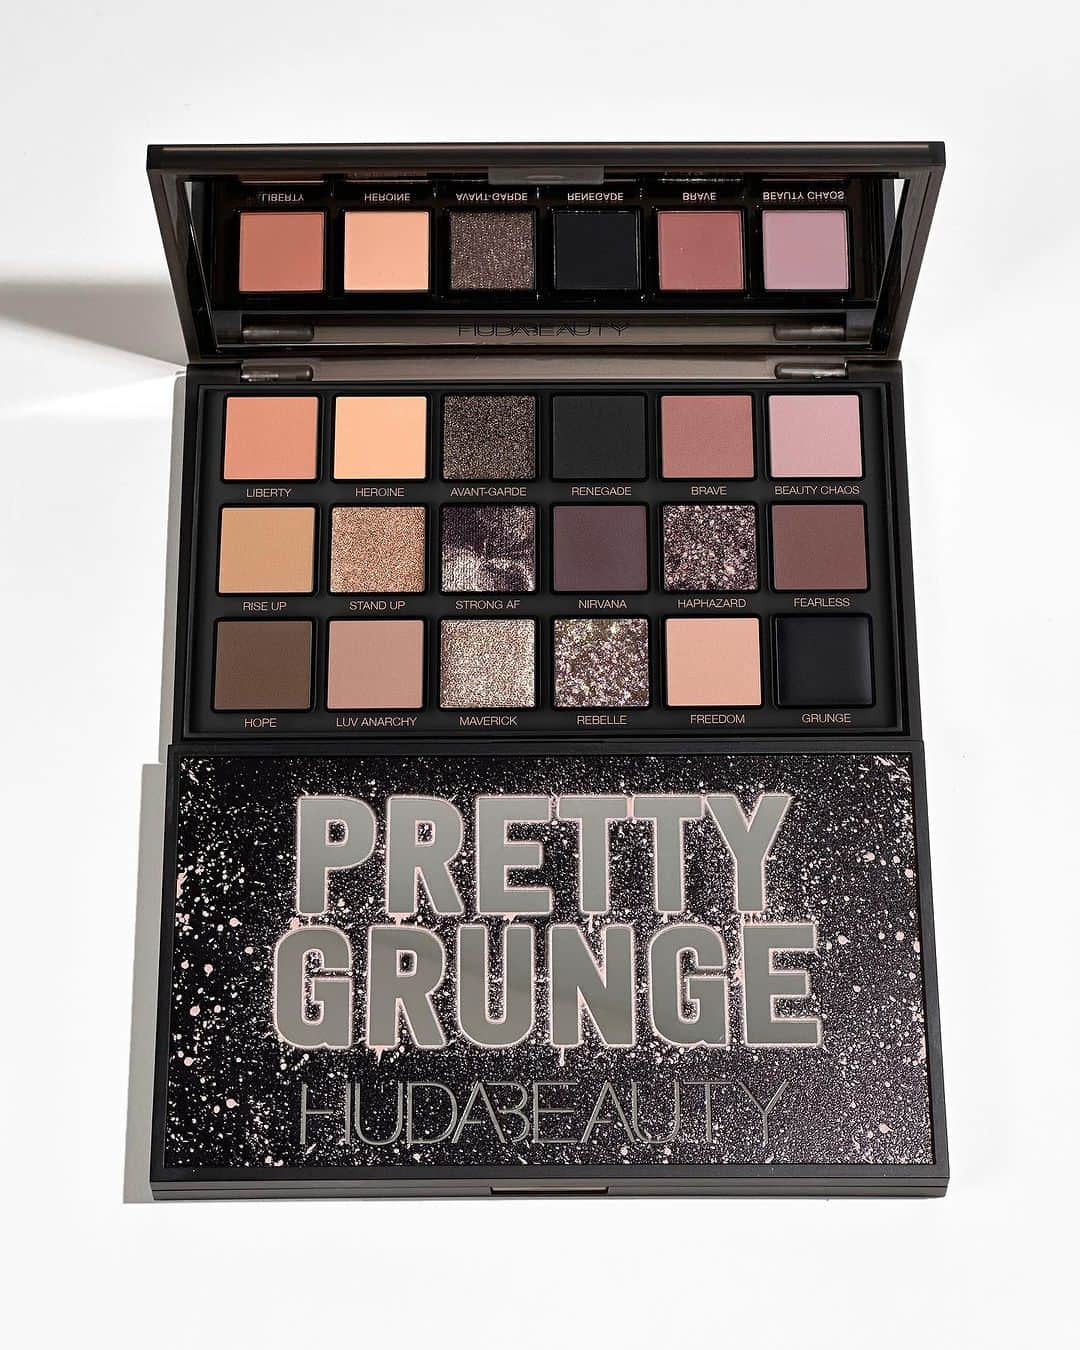 Huda Kattanのインスタグラム：「Unleash your inner HEROine with our NEW Pretty Grunge Palette! Each shade tells a story of empowerment, from 'STAND UP' and 'HOPE' to 'RISE UP' and 'FREEDOM,' let this palette inspire the strength within you.  This palette is a statement to remind you of what you're truly capable of, & with its versatile, intensely pigmented, & unapologetically bold shades, you can rise up, redefine beauty, & let your true colors shine. 💥🖤  Meet the #PrettyGrunge Collection: 🎨 #PrettyGrunge palette with 18 pretty-to-grunge shades  🌟 Limited-edition Blush Gloss that adjusts to your skin pH  🖤 Limited-edition ‘black’ shades in Liquid Matte Lipstick, Silk Balm & Lip Contour 2.0  💄 Lip Quad with x4 travel-sized Liquid Matte Lipsticks in nude shades, including our BEST-SELLING shade, Bombshell.   🌍 AVAILABLE GLOBALLY NOV 1ST 🌎 #PrettyGrunge」